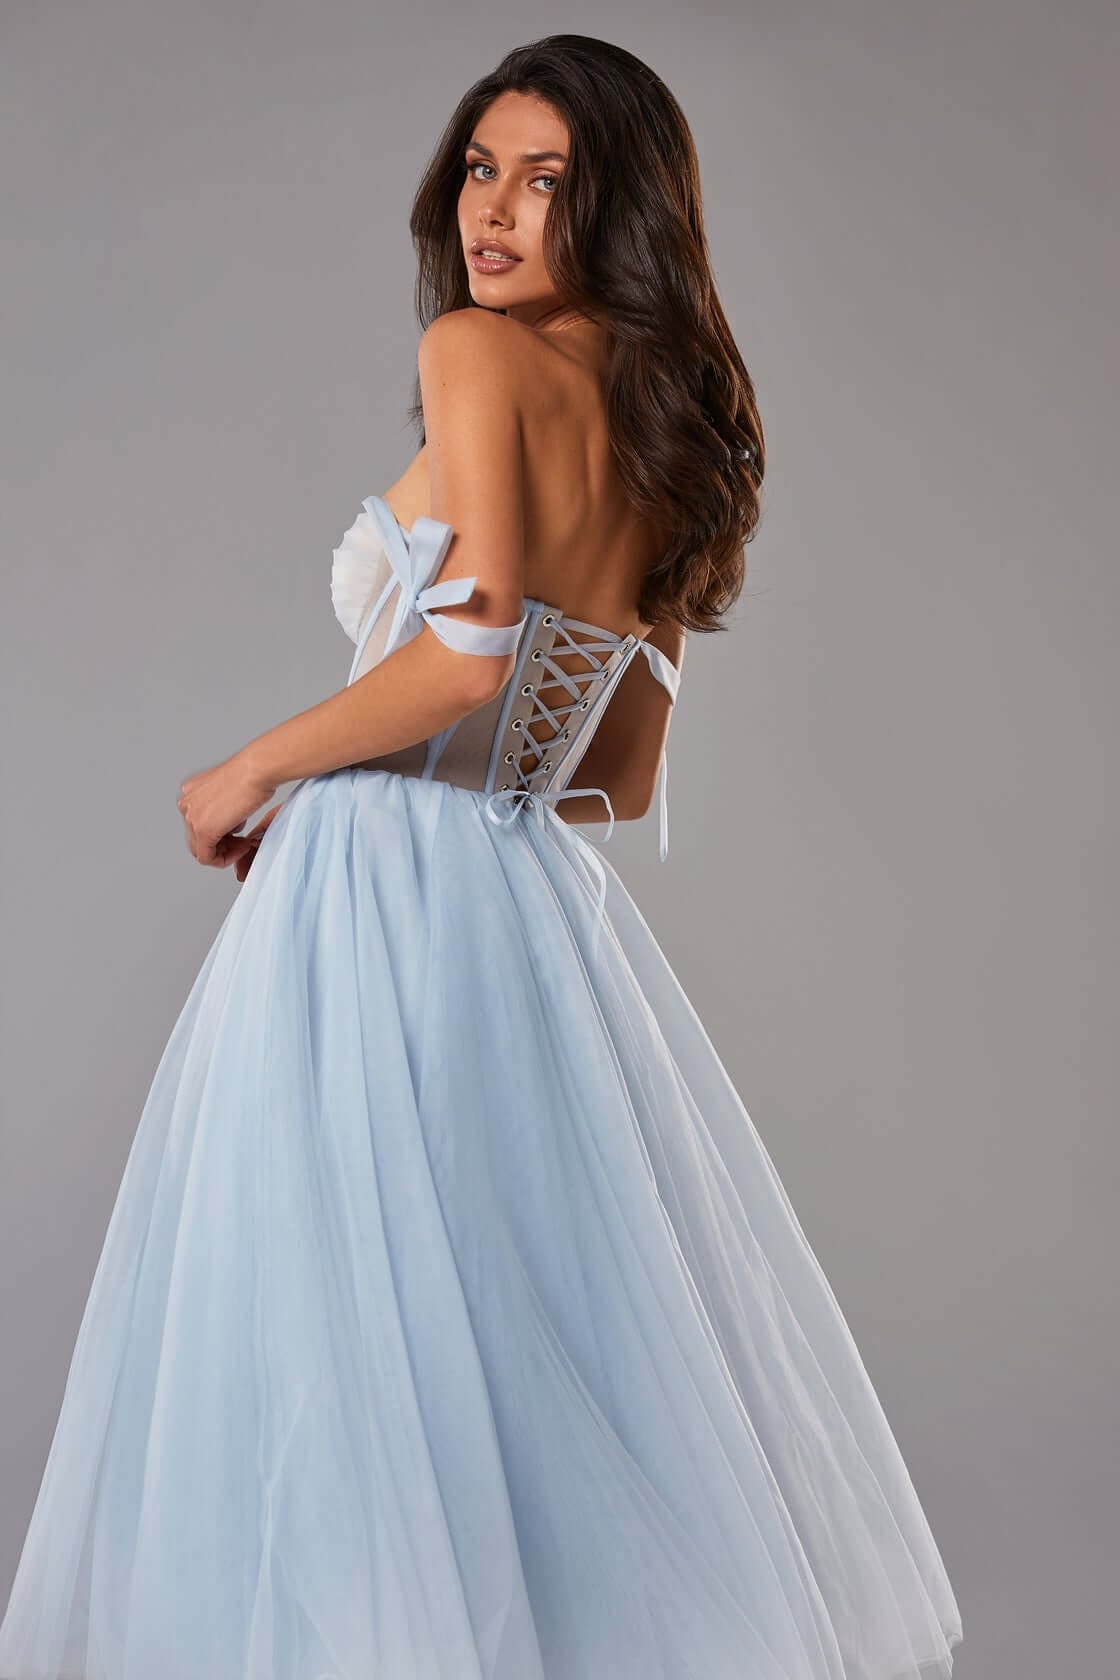 Ontario Maxi Dress - Off Shoulder Corset Bodice Tulle Dress in Light Blue